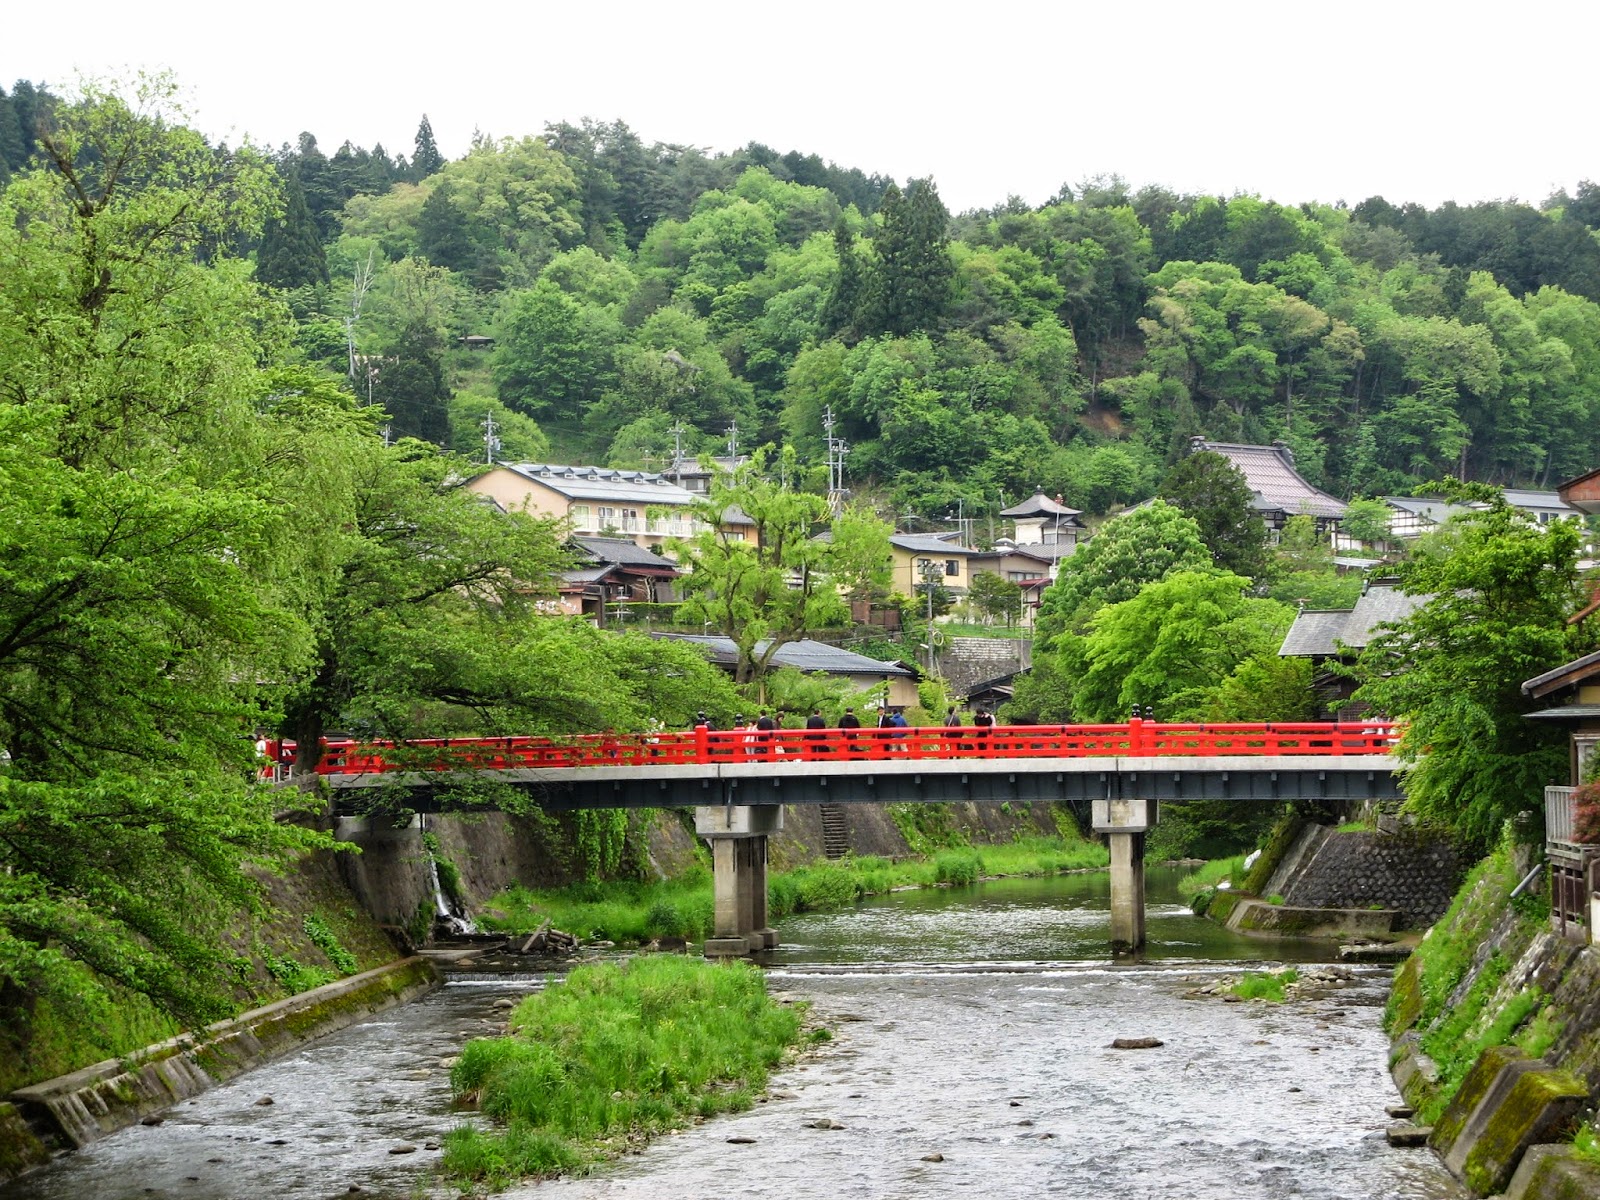 Hida-Takayama Japan tour  @ in-all-places